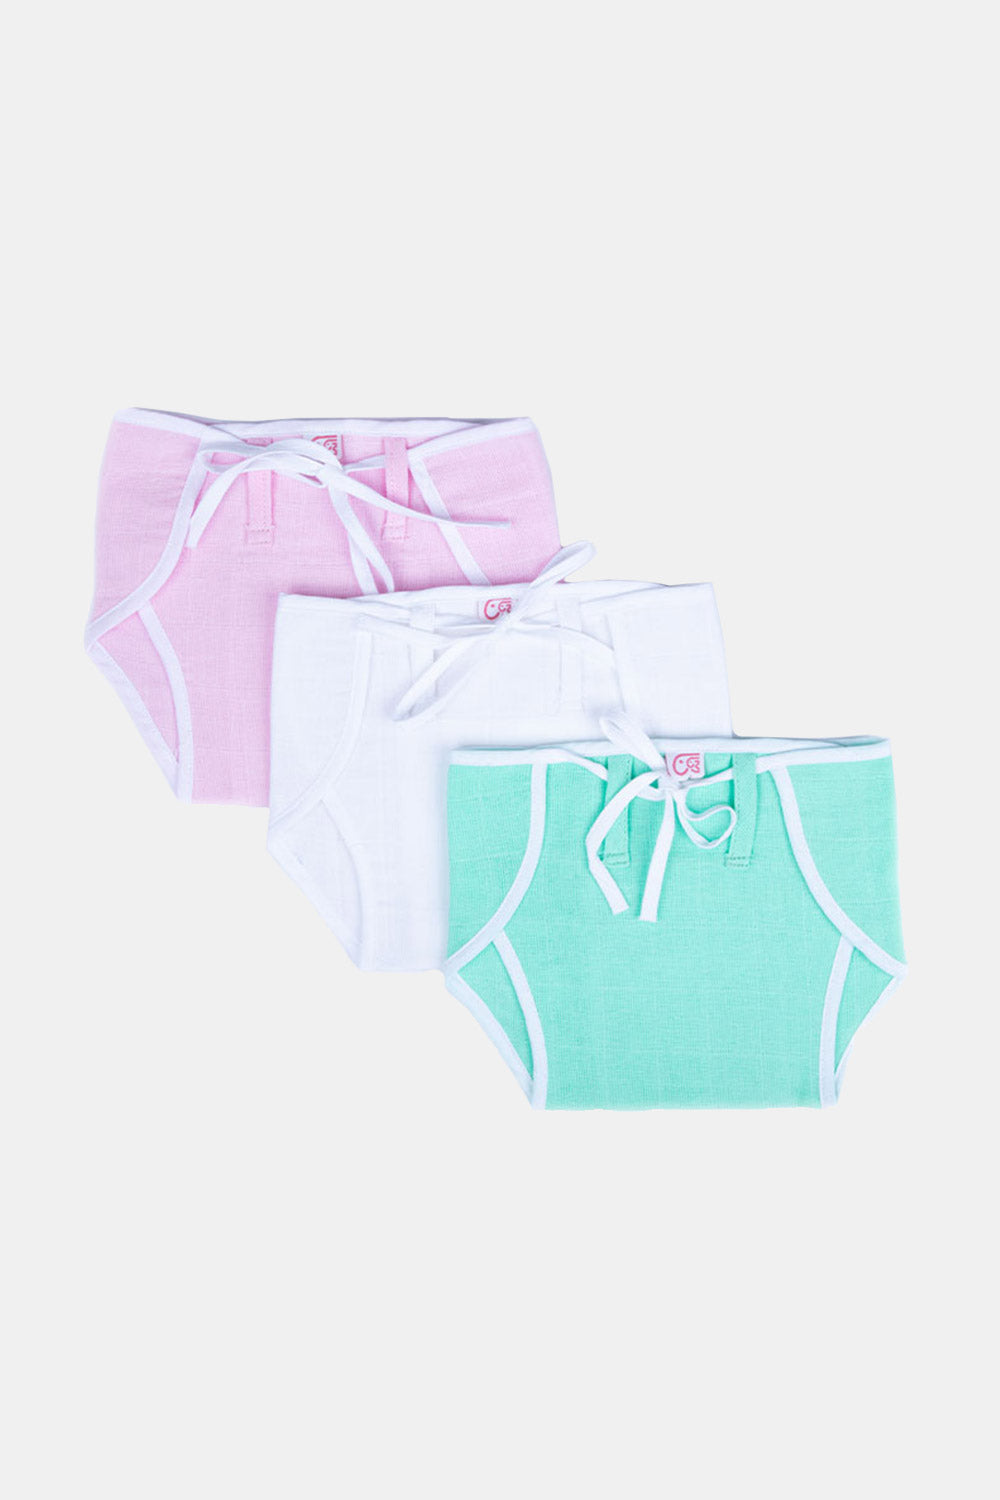 Oh Baby - 3 Piece Set Of Tie Up Cloth Diaper - K3PP Size   0m-3m Color Assorted Pack